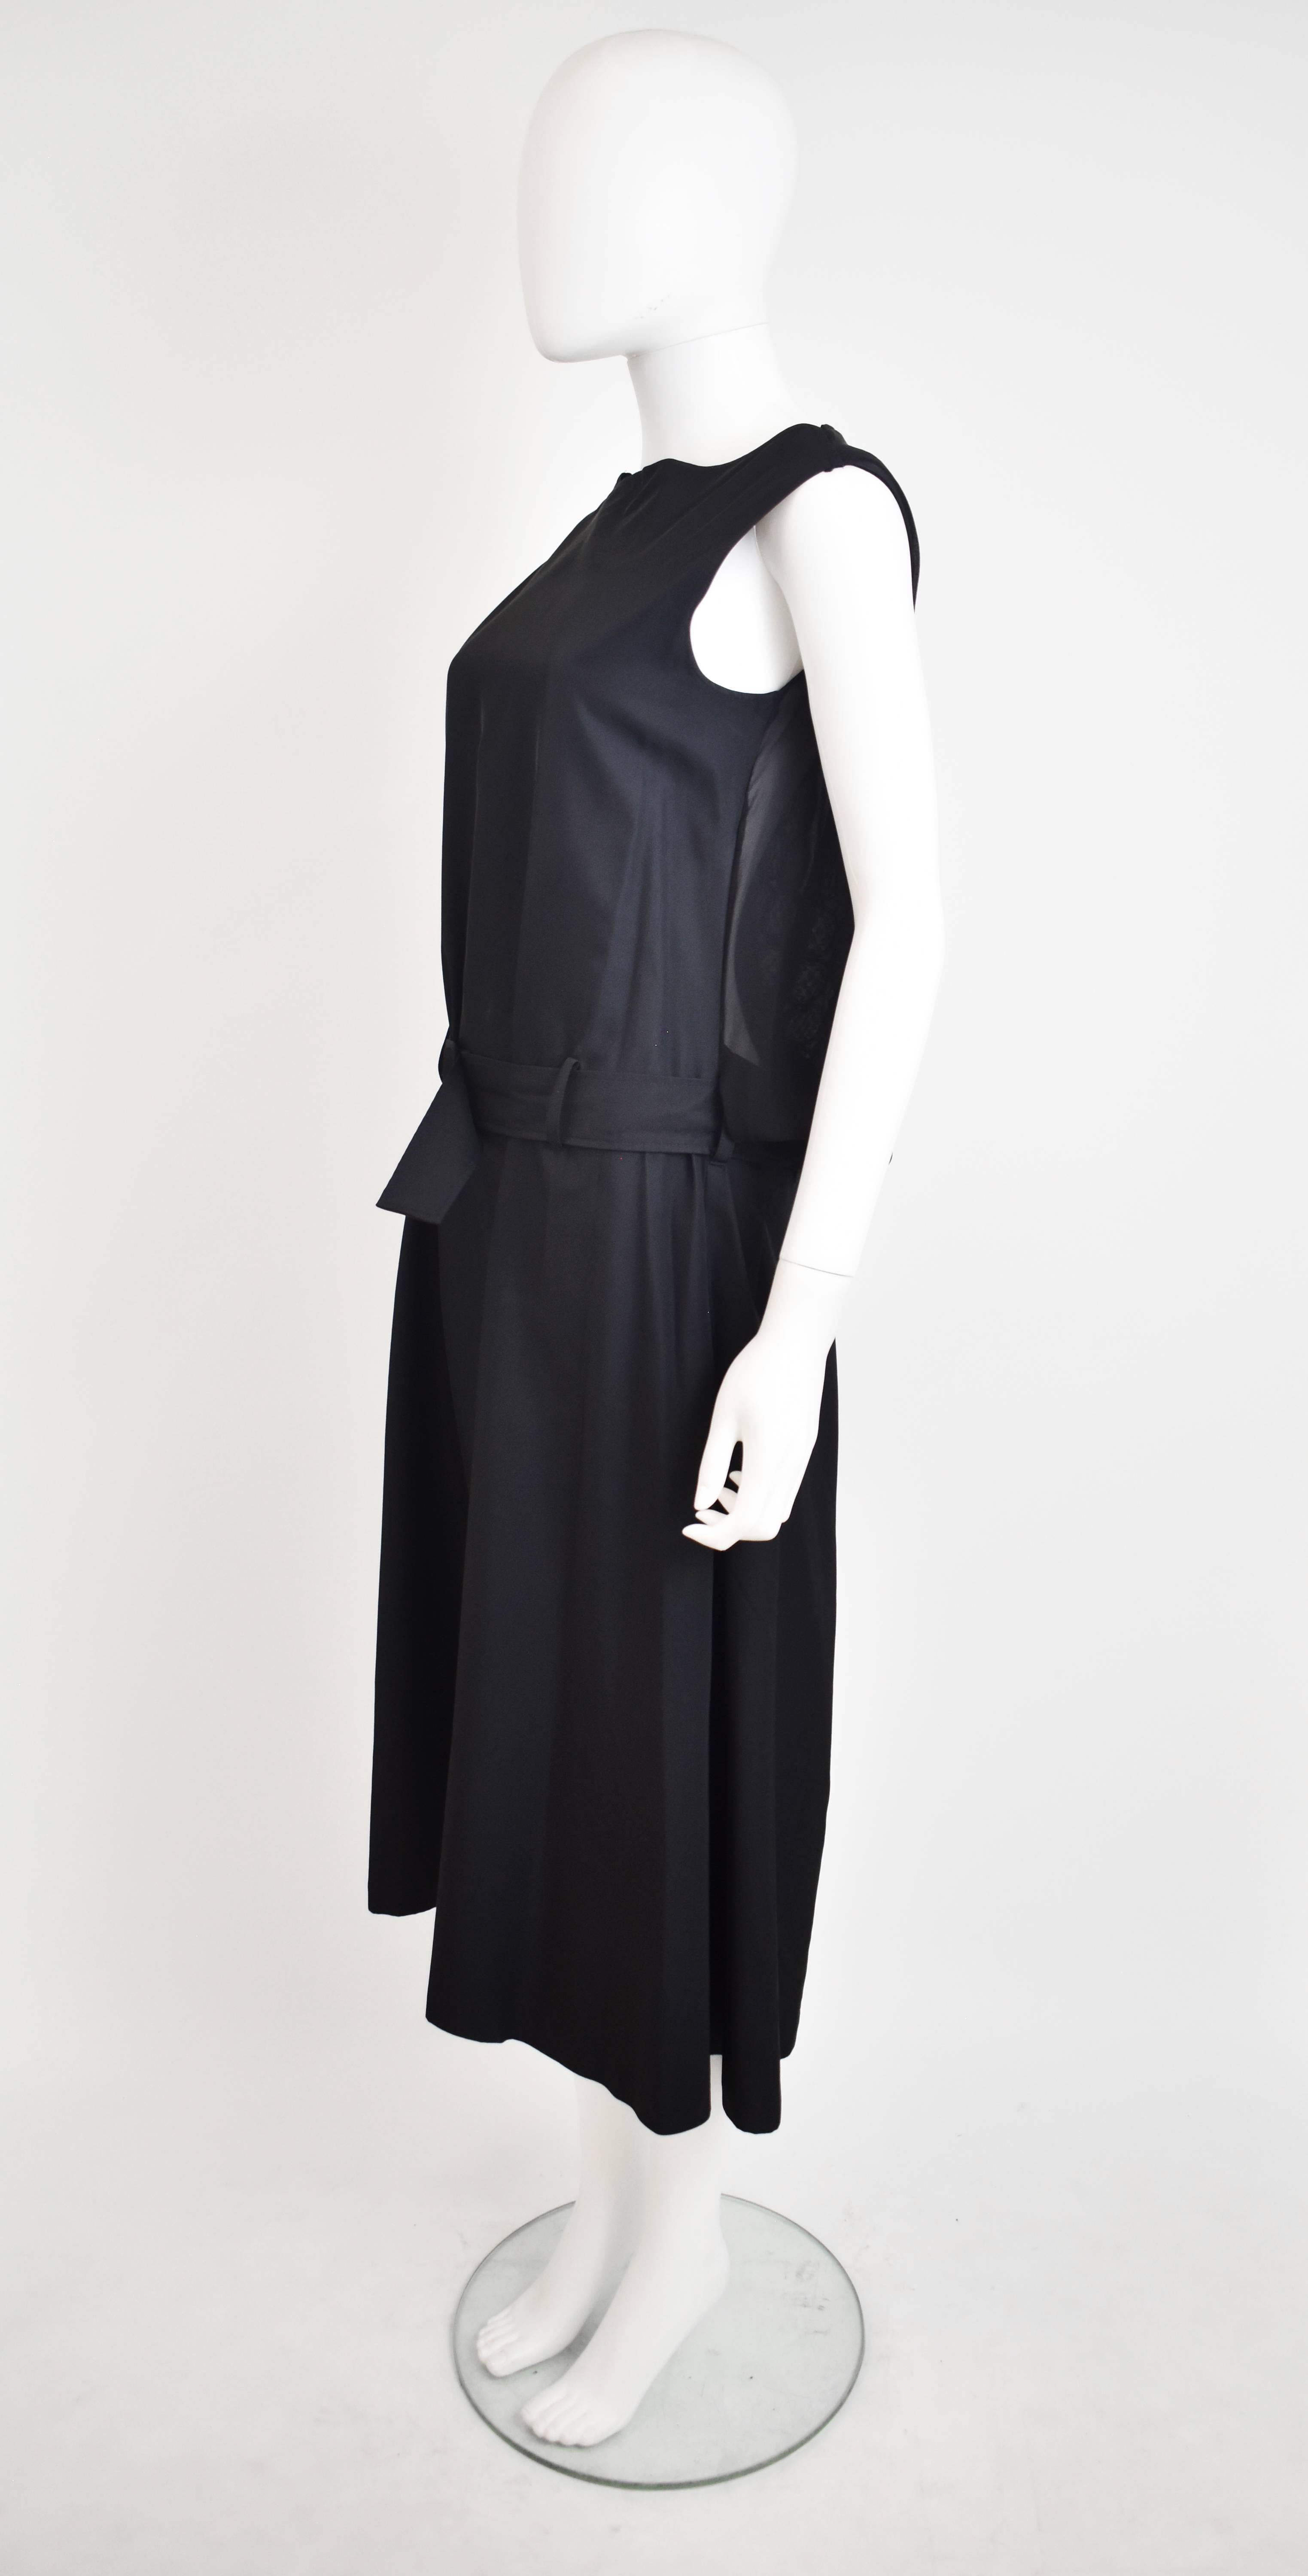 A stunning and rare black dress from Yohji Yamamoto. The dress has a simple shape with vest shoulders, a straight shape and long length. It has a lace panel on the back which peeks out from behind the main structure of the dress. It also has a belt